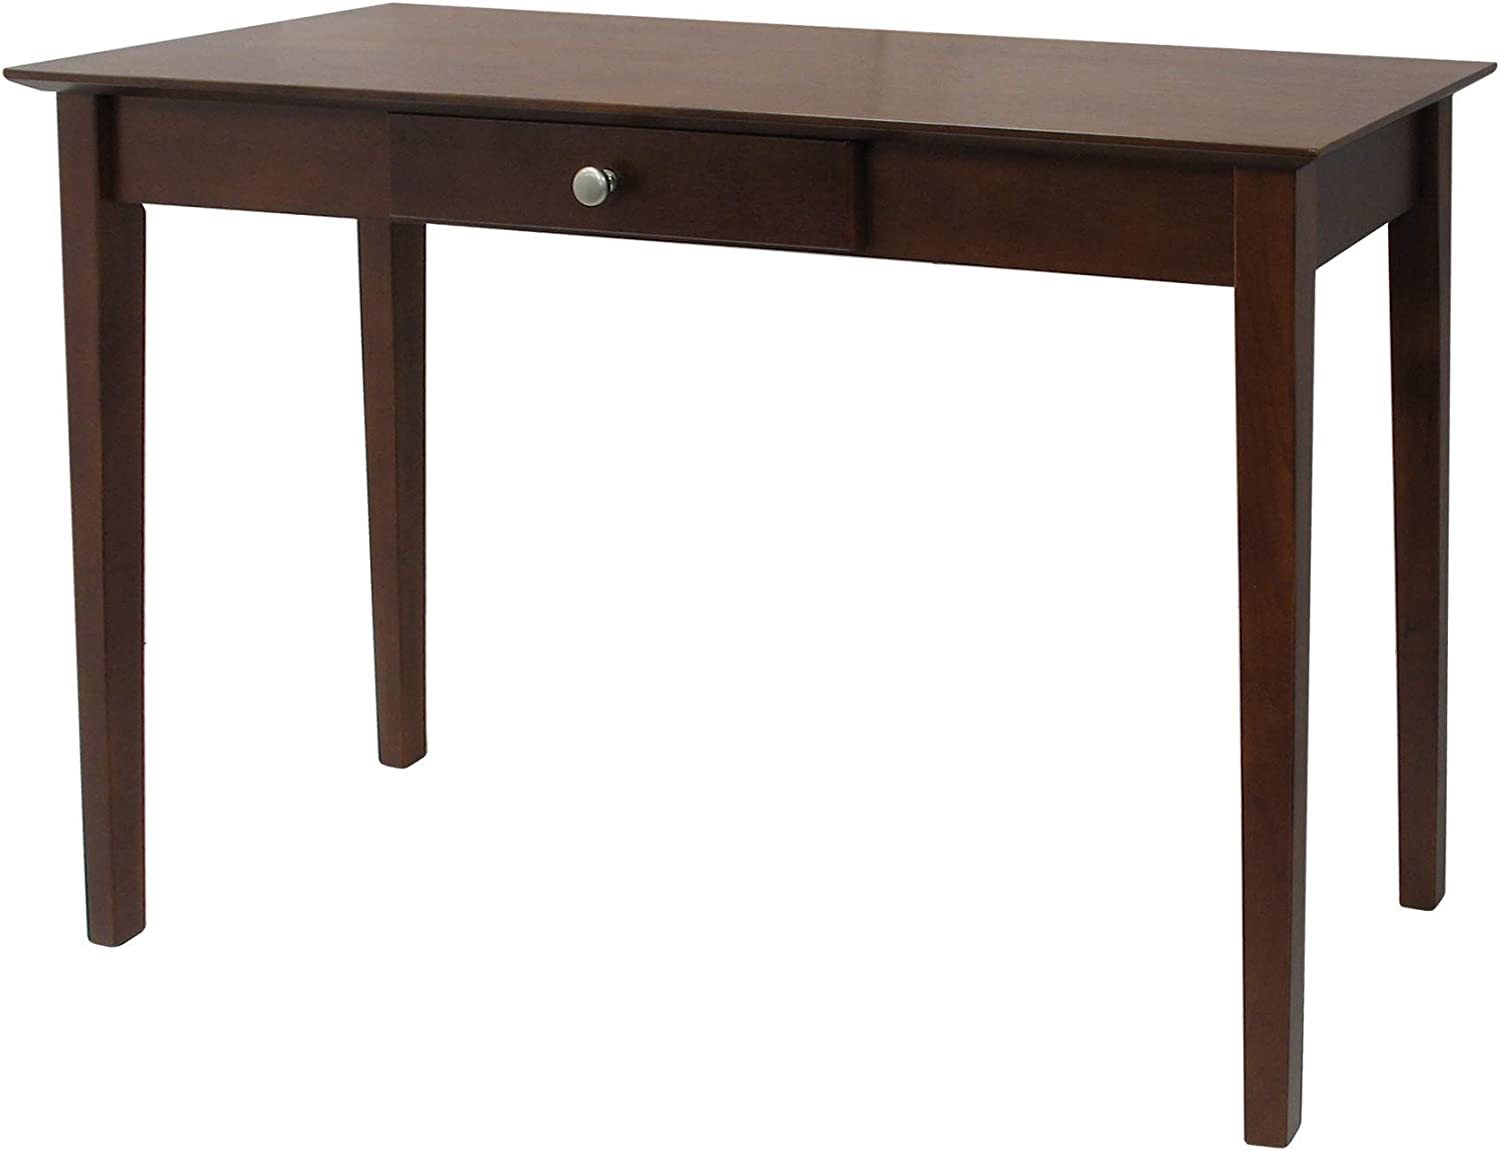 Winsome Wood Rochester Occasional Table, Antique Walnut - $105.99